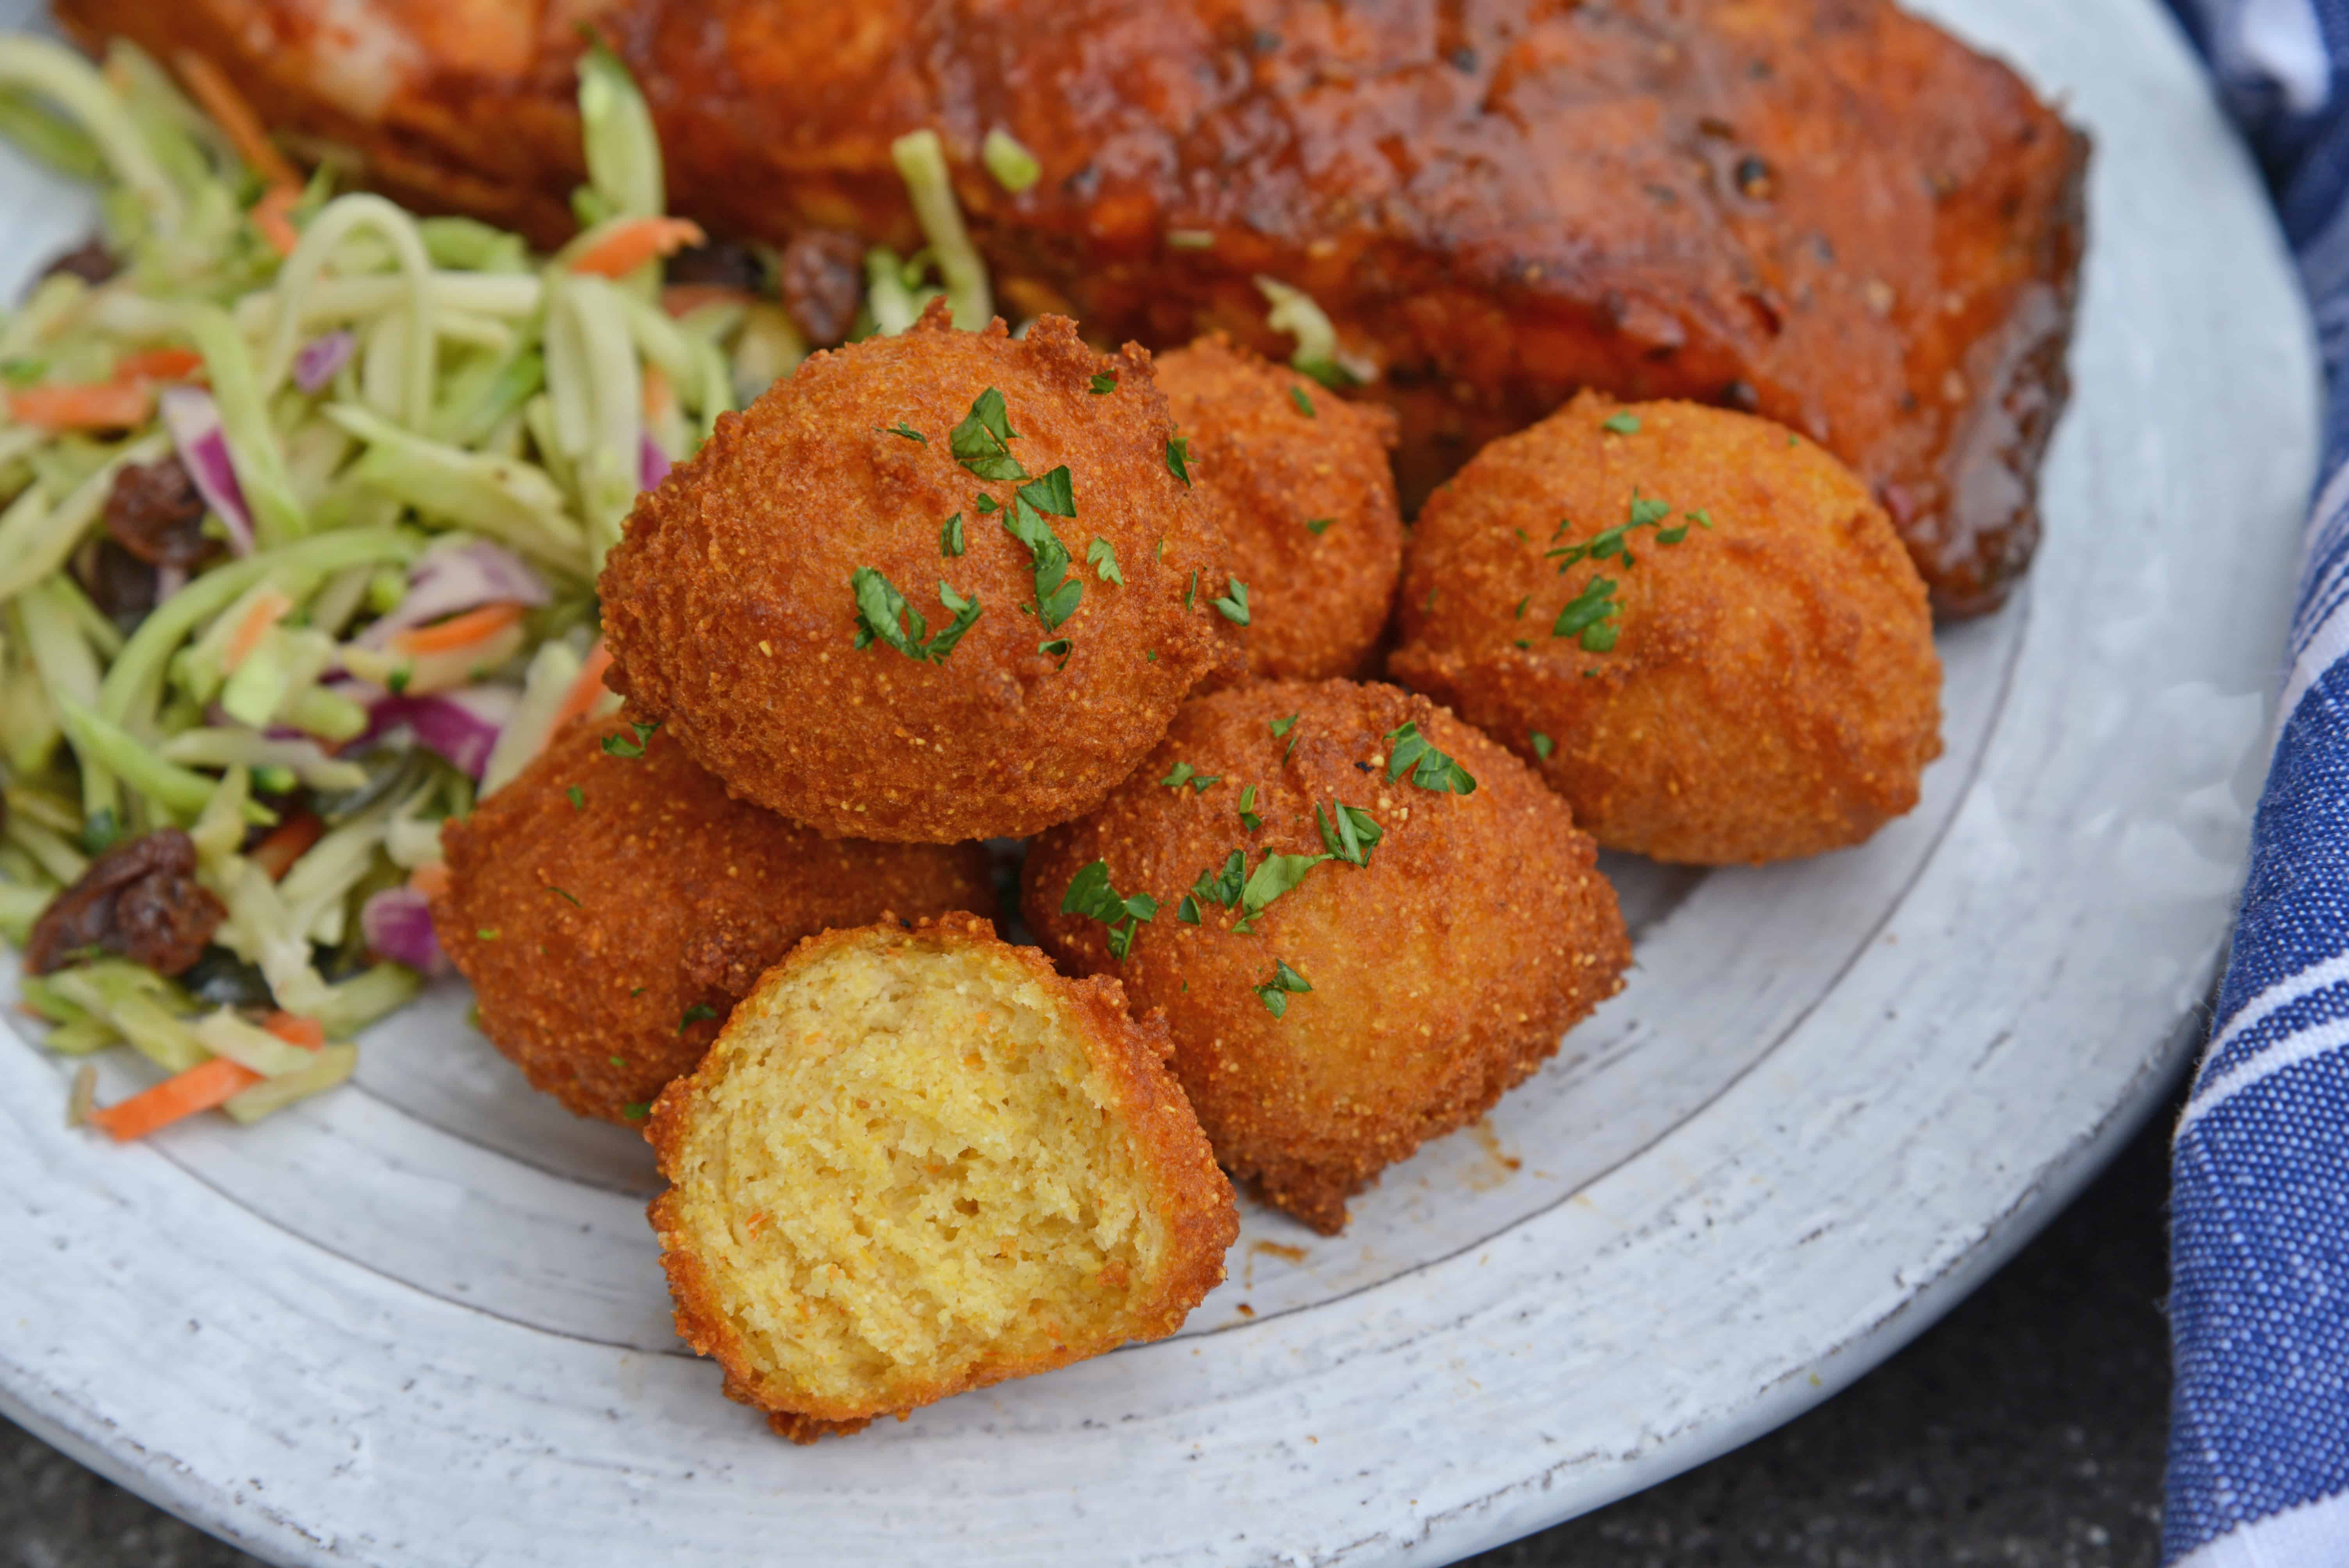 EASY Southern Hush Puppies Recipe Fried Cornbread in 30 minutes!